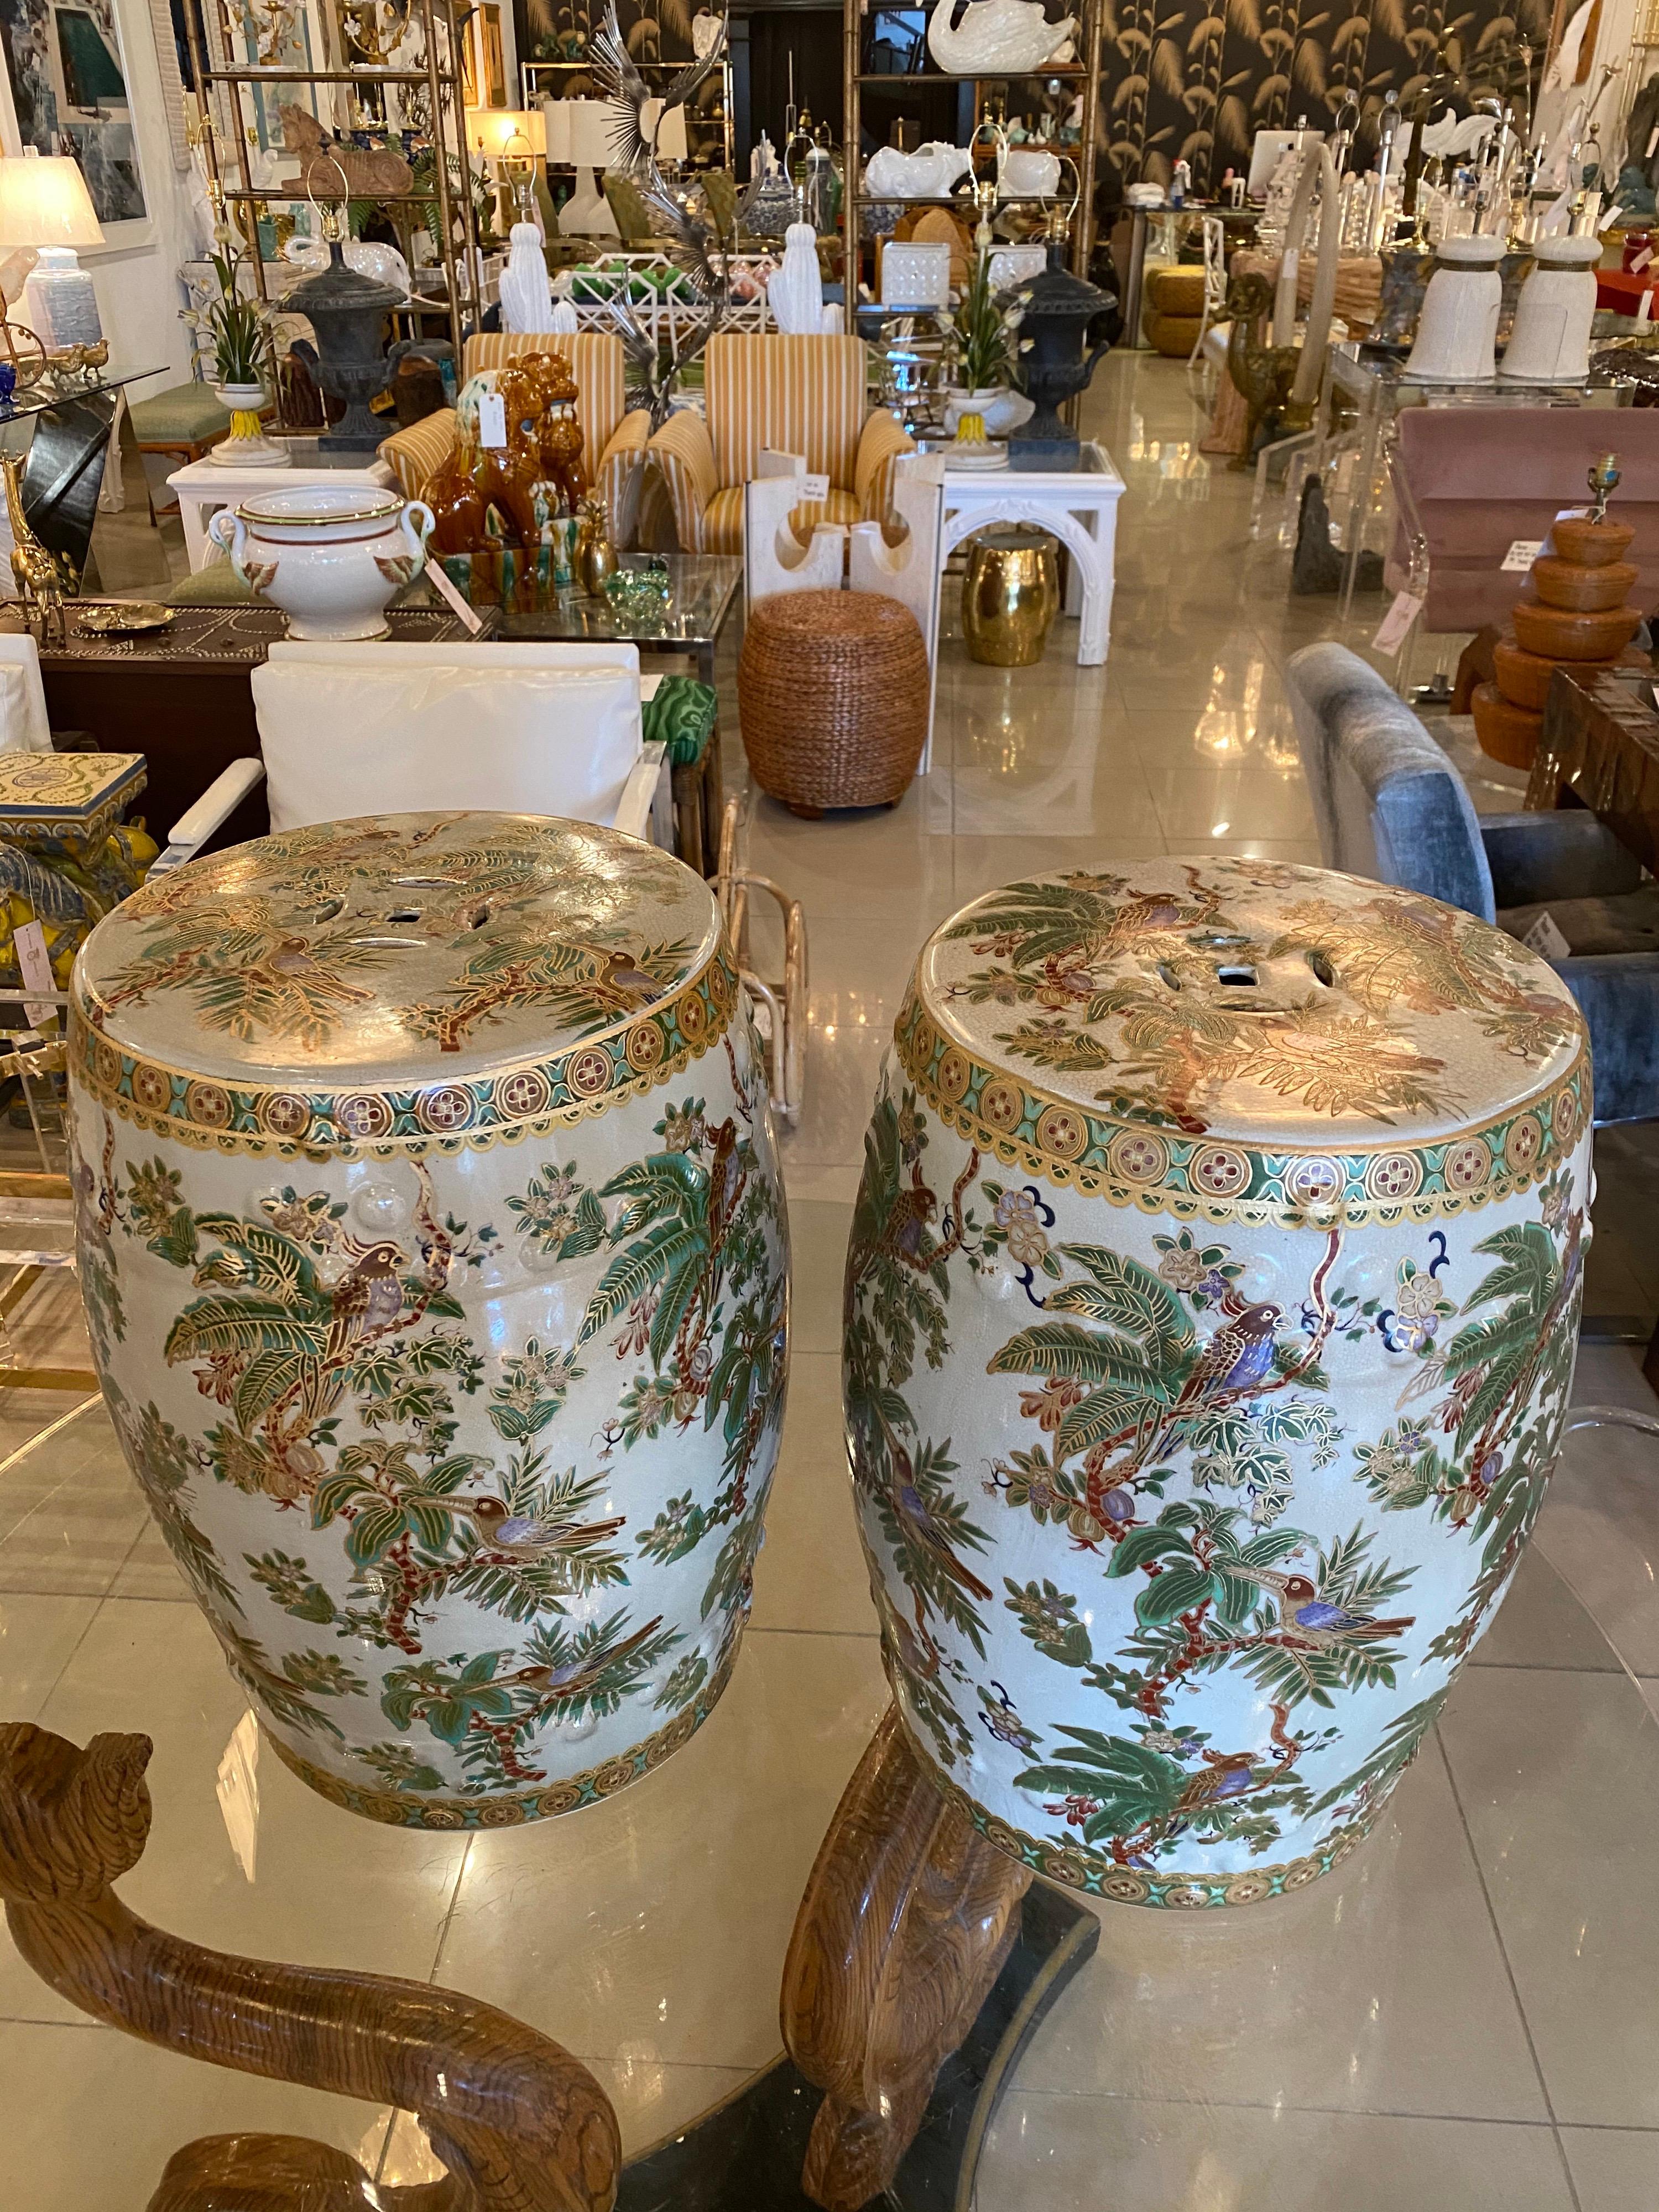 The most amazing pair of vintage garden drum benches stools. Beautiful parrots & palm tree leaves make these perfectly tropical Palm Beach stools stand out from the rest!